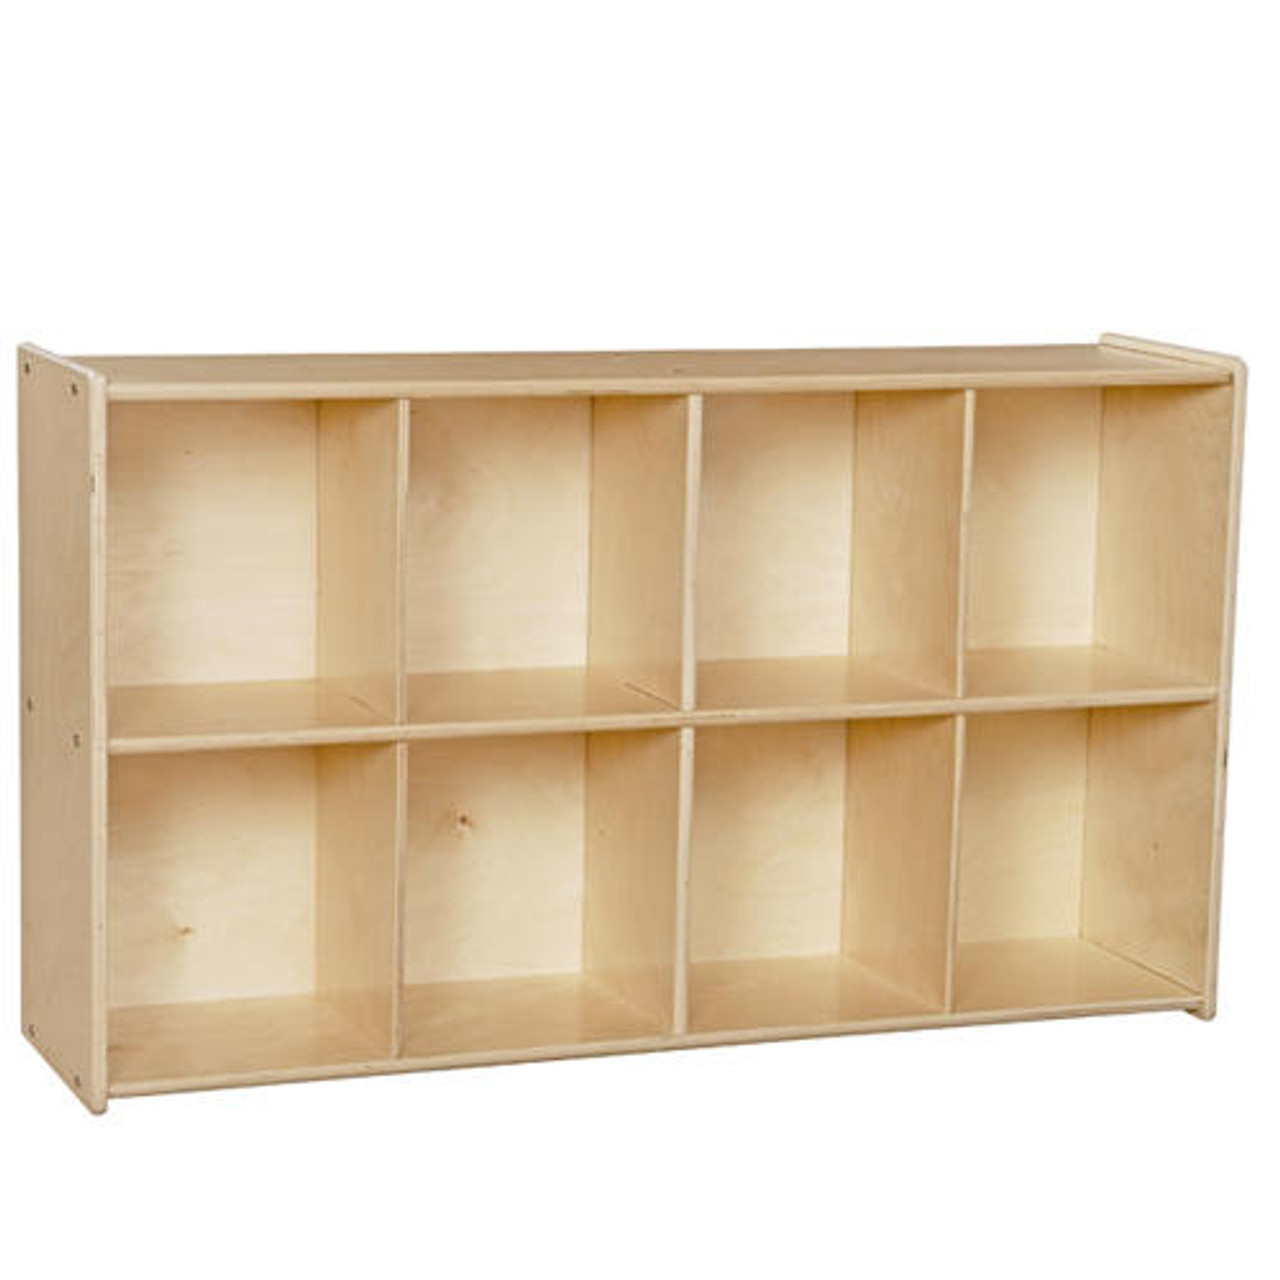 https://cdn11.bigcommerce.com/s-kd3y7/images/stencil/1280x1280/products/994/56696/contender-c50908f-eight-cubby-knapsack-storage-assembled__75754.1657360927.jpg?c=2